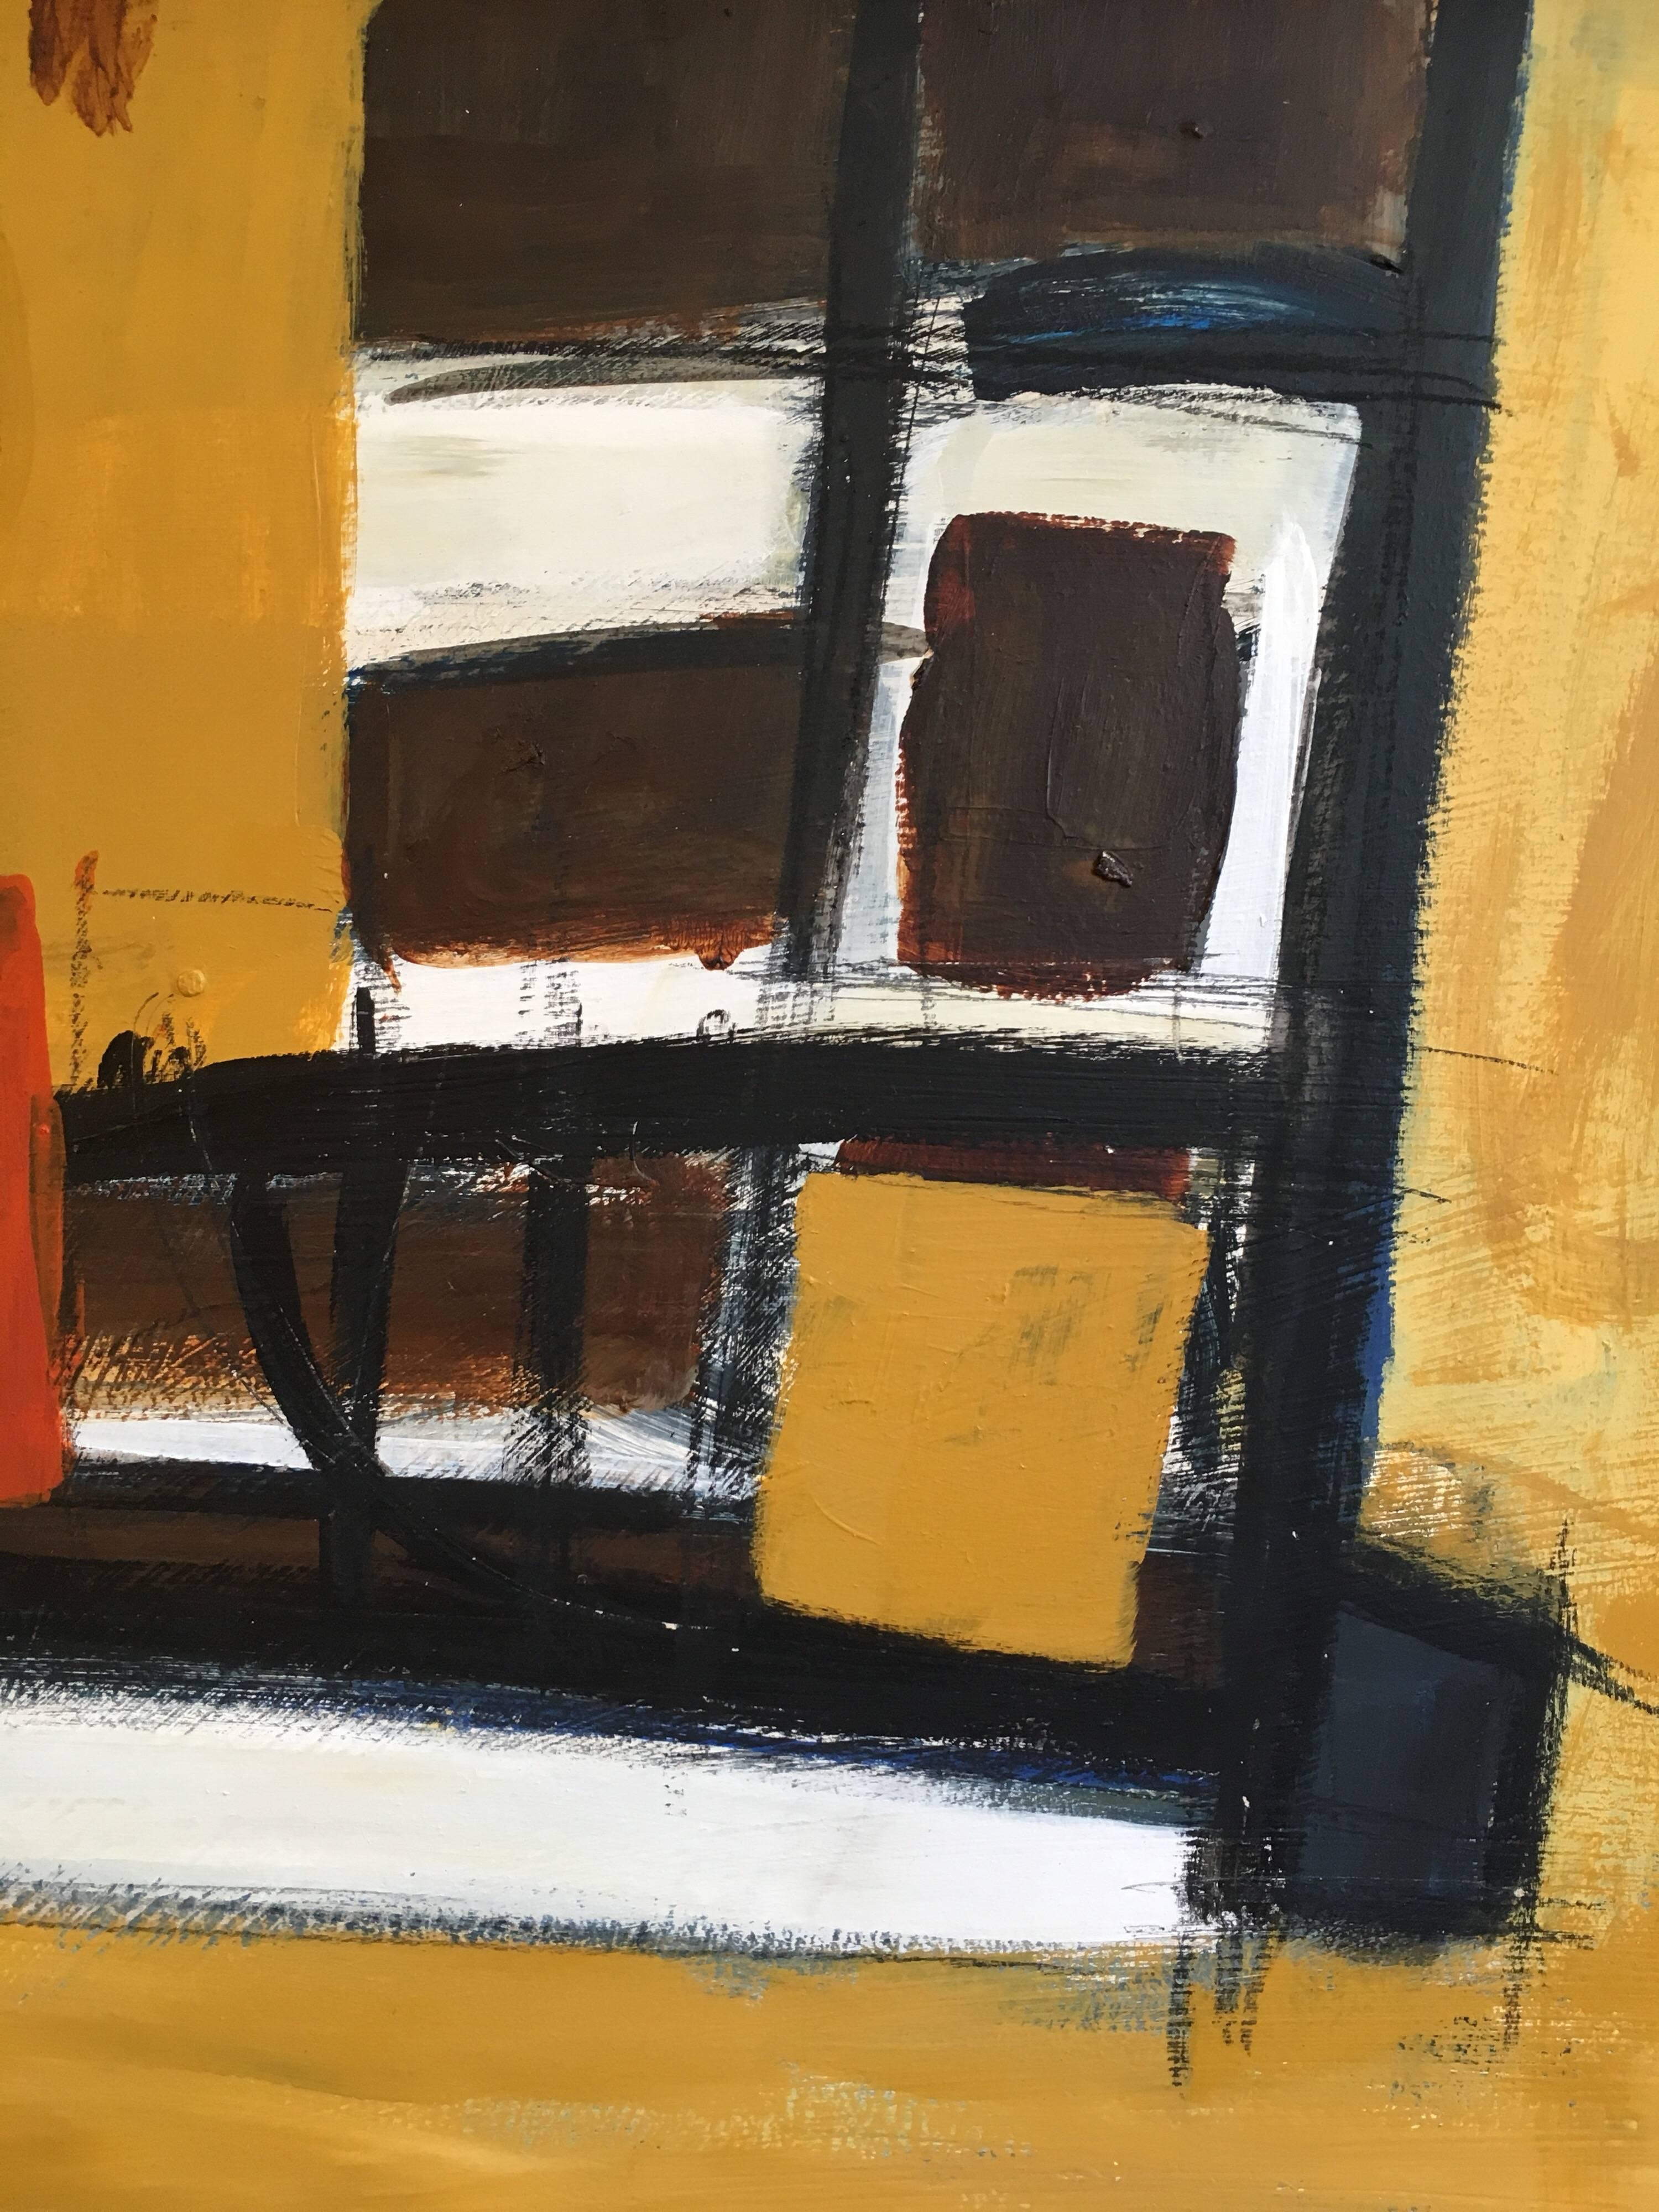 'Sandscape' Large Abstract Oil Painting
Modern British, 21st Century
Titled 'Sandscape' (Tarragona 2) verso 
painting on board, framed
Framed size: 23.5 x 39 inches

Stylish abstract oil painting, using a desirable colour palette of ochre yellows,